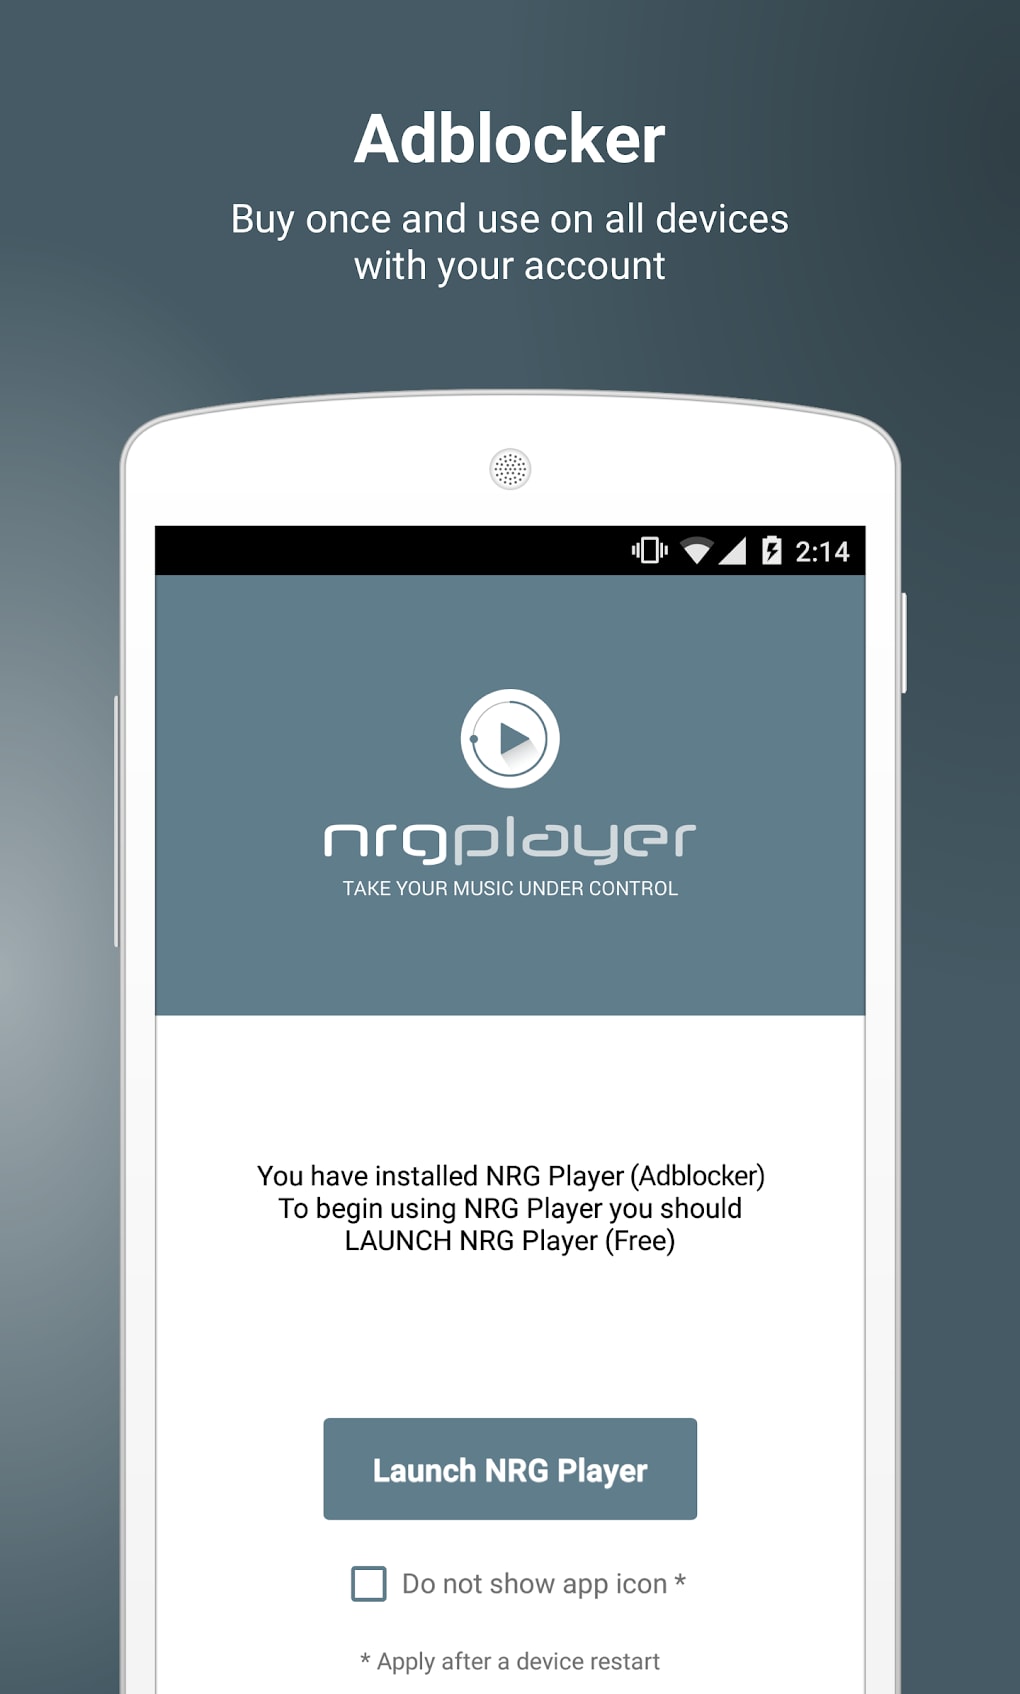 nrg-player-adblocker-apk-pour-android-t-l-charger